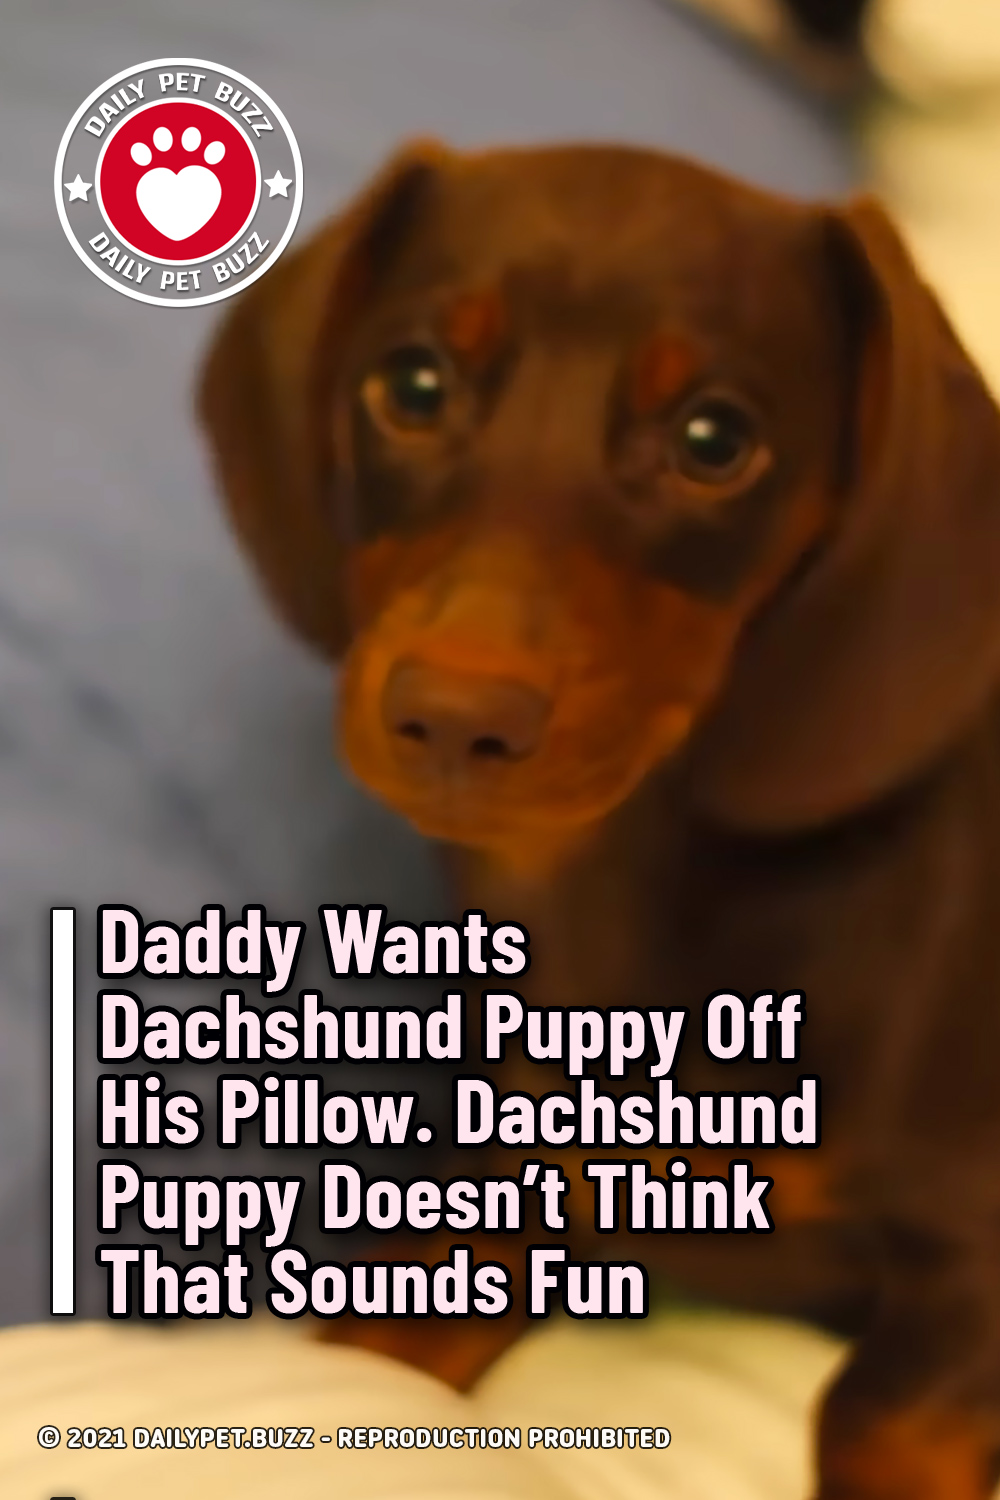 Daddy Wants Dachshund Puppy Off His Pillow. Dachshund Puppy Doesn\'t Think That Sounds Fun